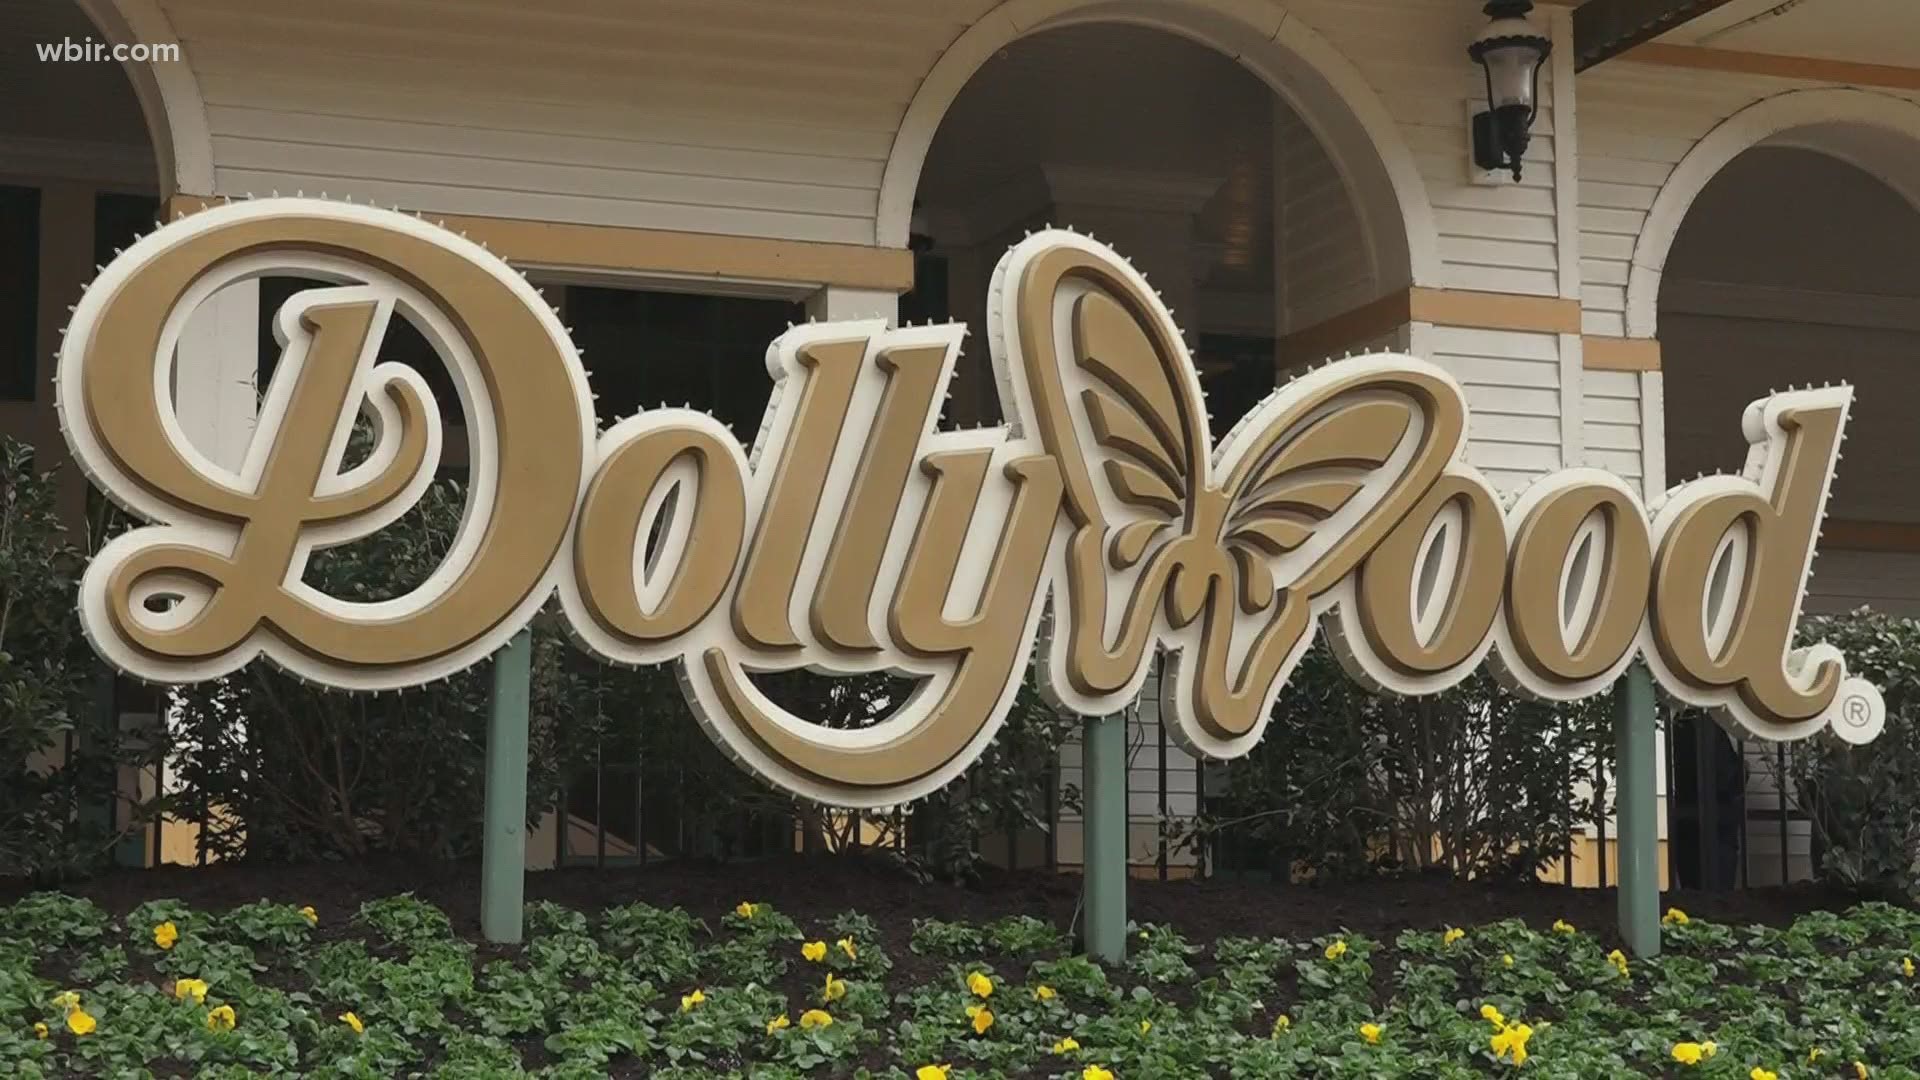 What's new at Dollywood for 2021?